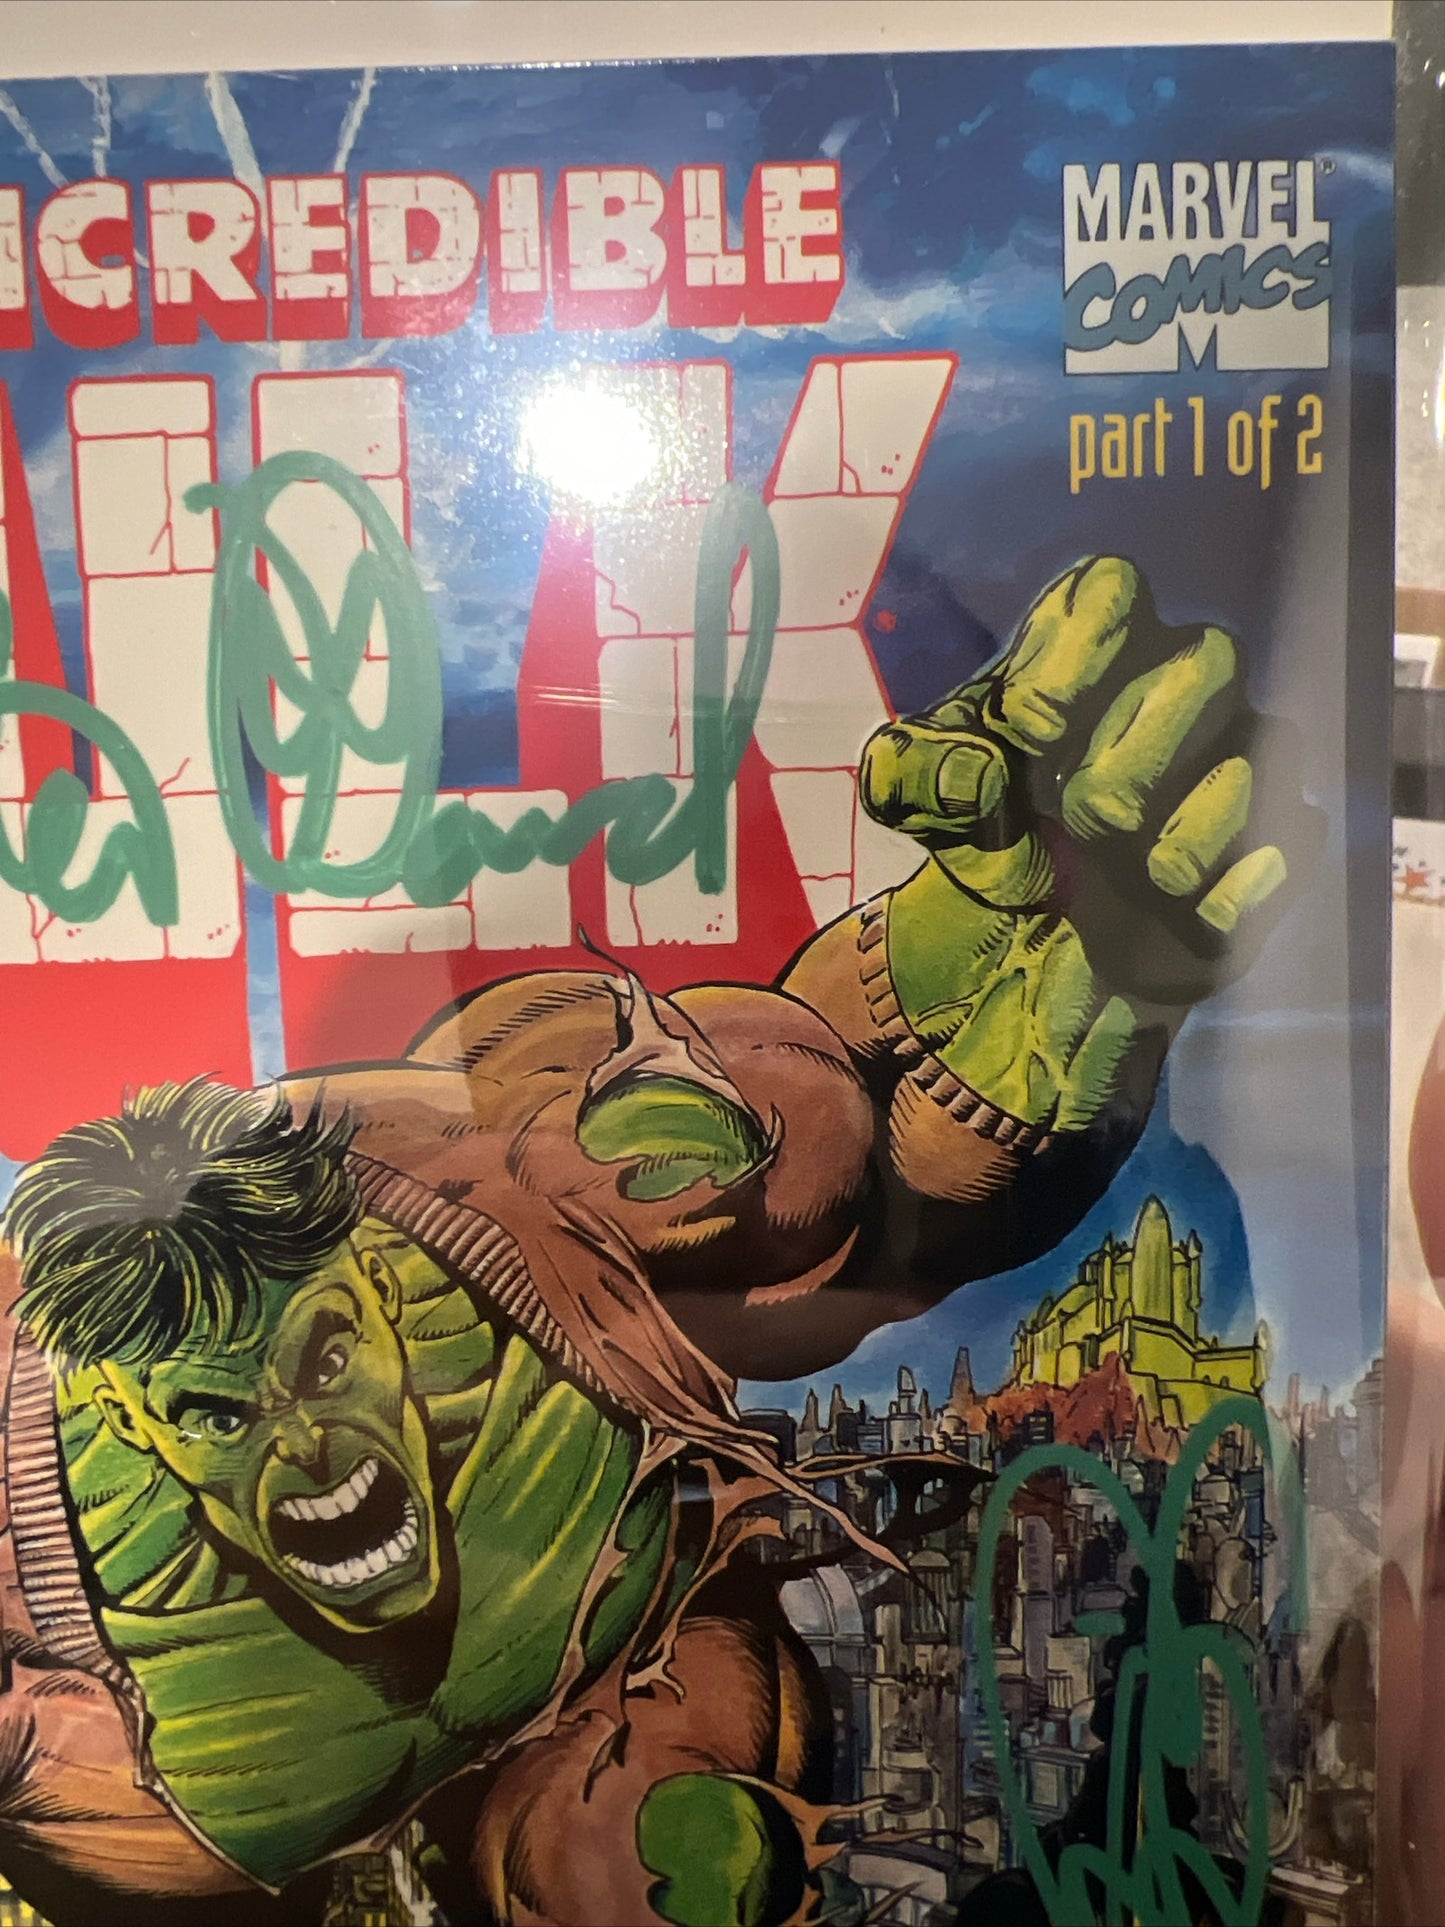 Incredible Hulk: Future Imperfect 1 & 2 Set (Heroes Aren’t Hard To Find) signed by George Perez, Tom Smith and Peter David with COA